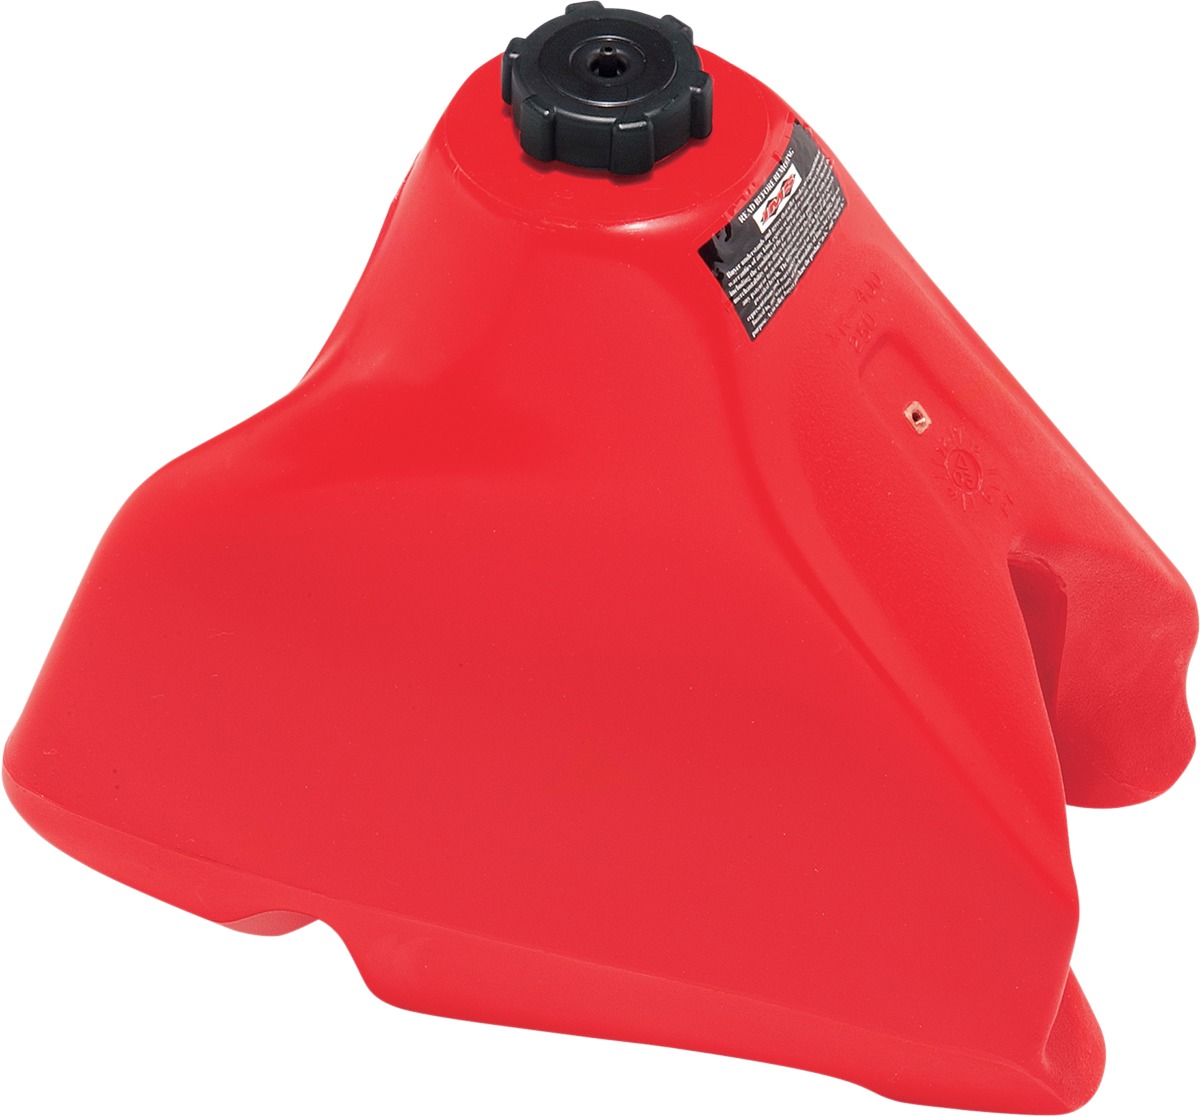 Large-Capacity Gas Tanks - Xr Tank 4.0Gal Rd Ims - Click Image to Close